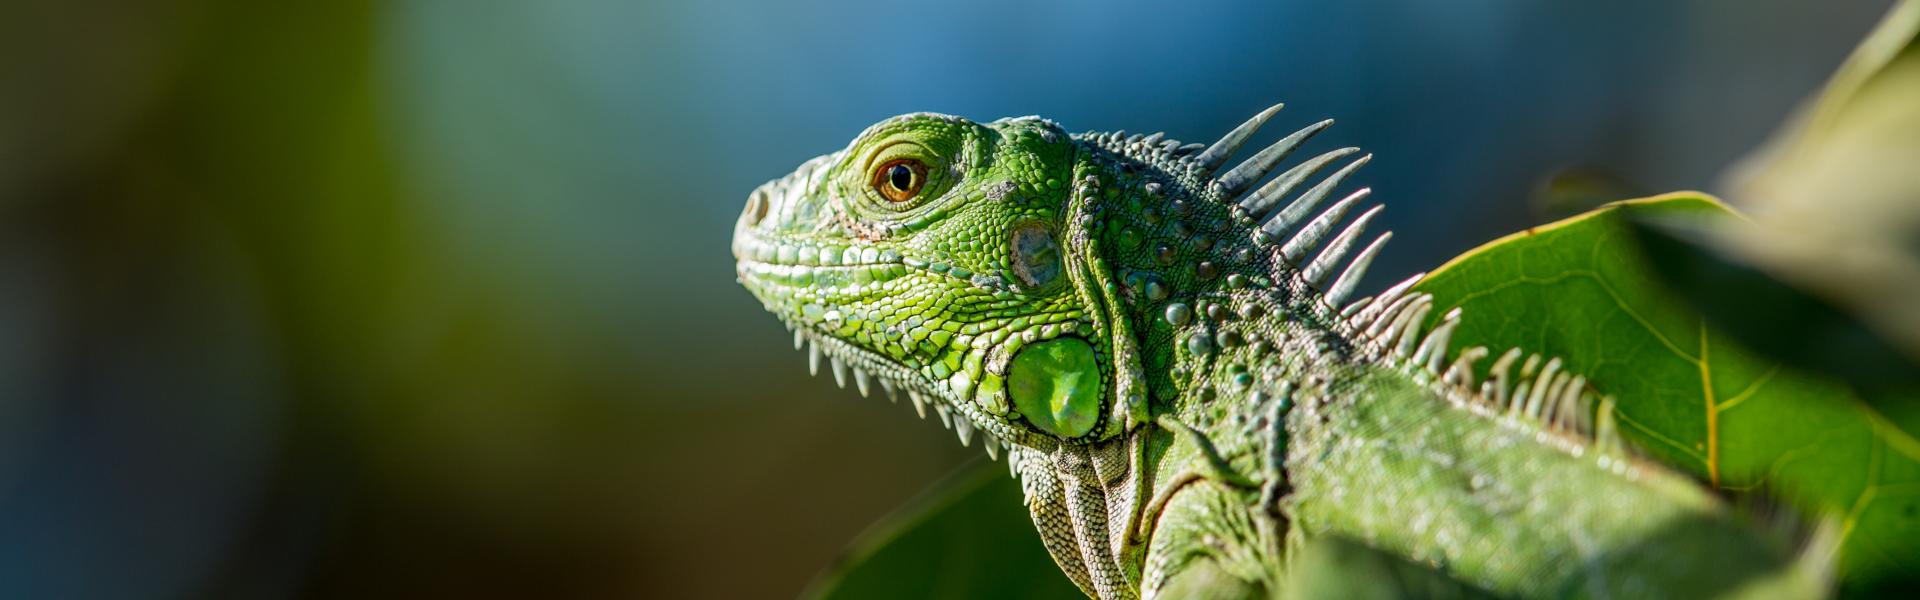 An iguana sitting in a forest.